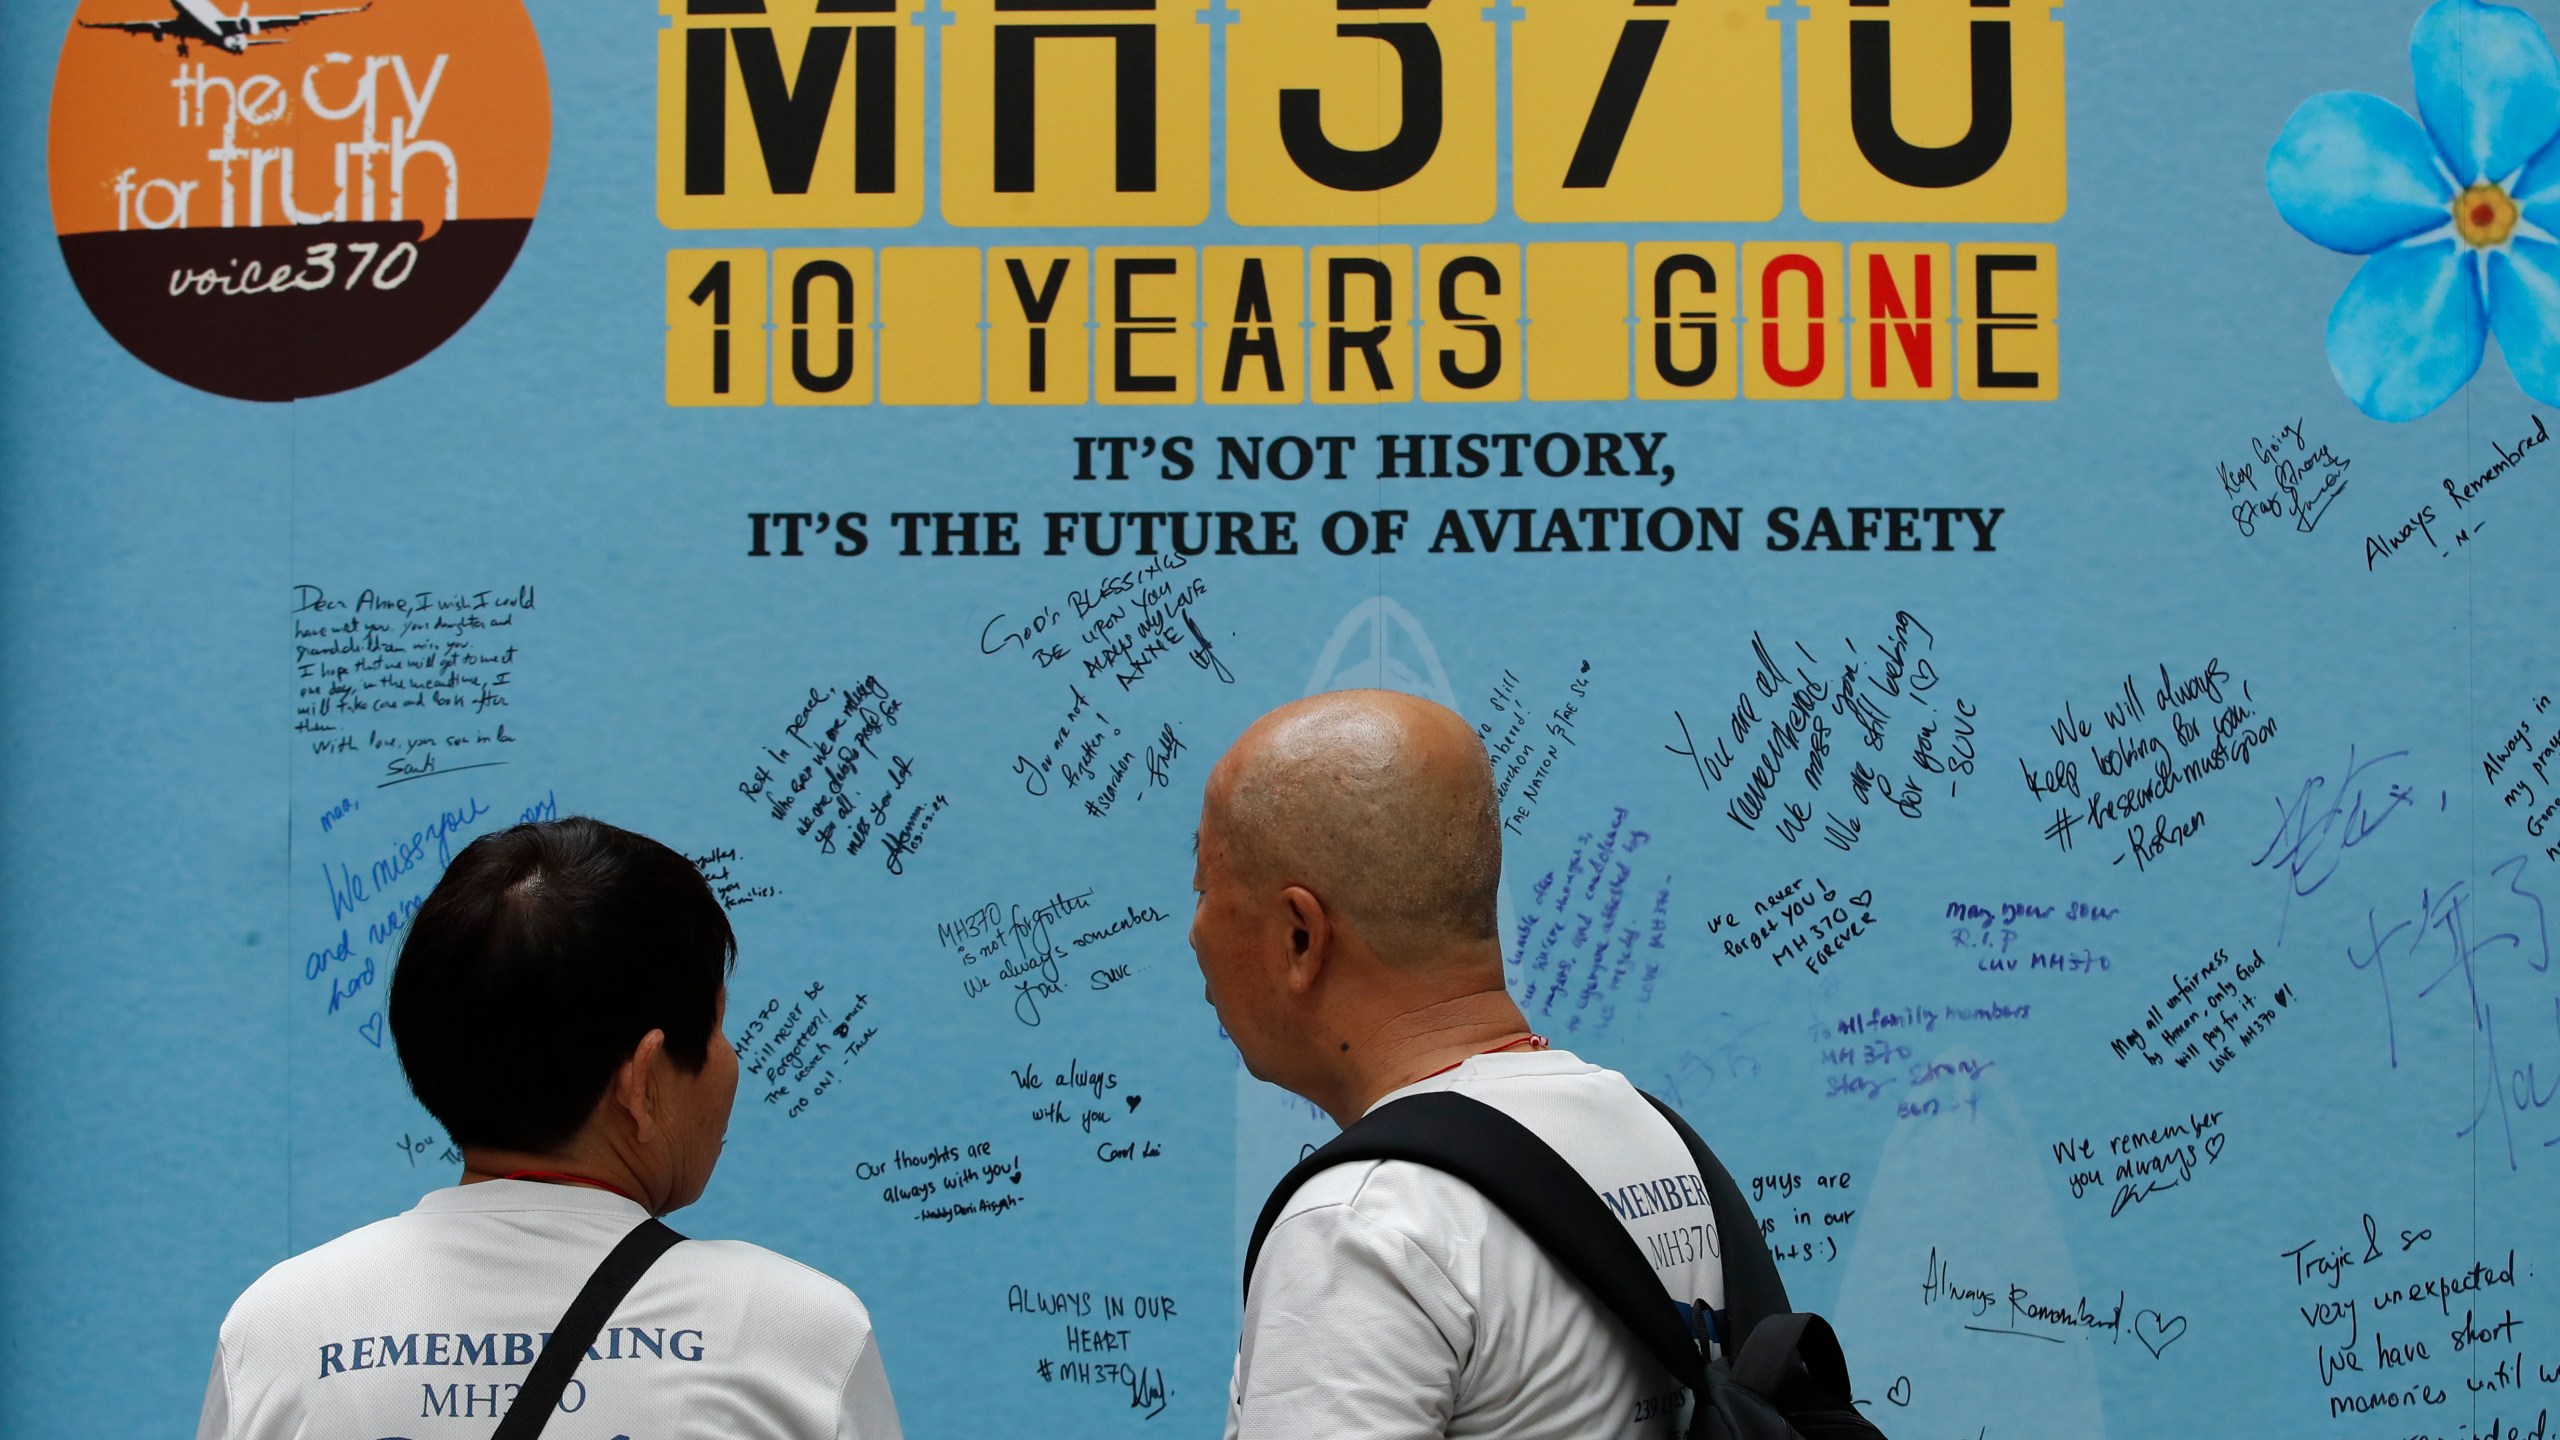 Family members of passengers on board from China of the missing Malaysia Airlines Flight 370 look at the messages board during the tenth annual remembrance event at a shopping mall, in Subang Jaya, on the outskirts of Kuala Lumpur, Malaysia, Sunday, March 3, 2024. Ten years ago, a Malaysia Airlines Flight 370, had disappeared March 8, 2014 while en route from Kuala Lumpur to Beijing with 239 people on board. (AP Photo/FL Wong)